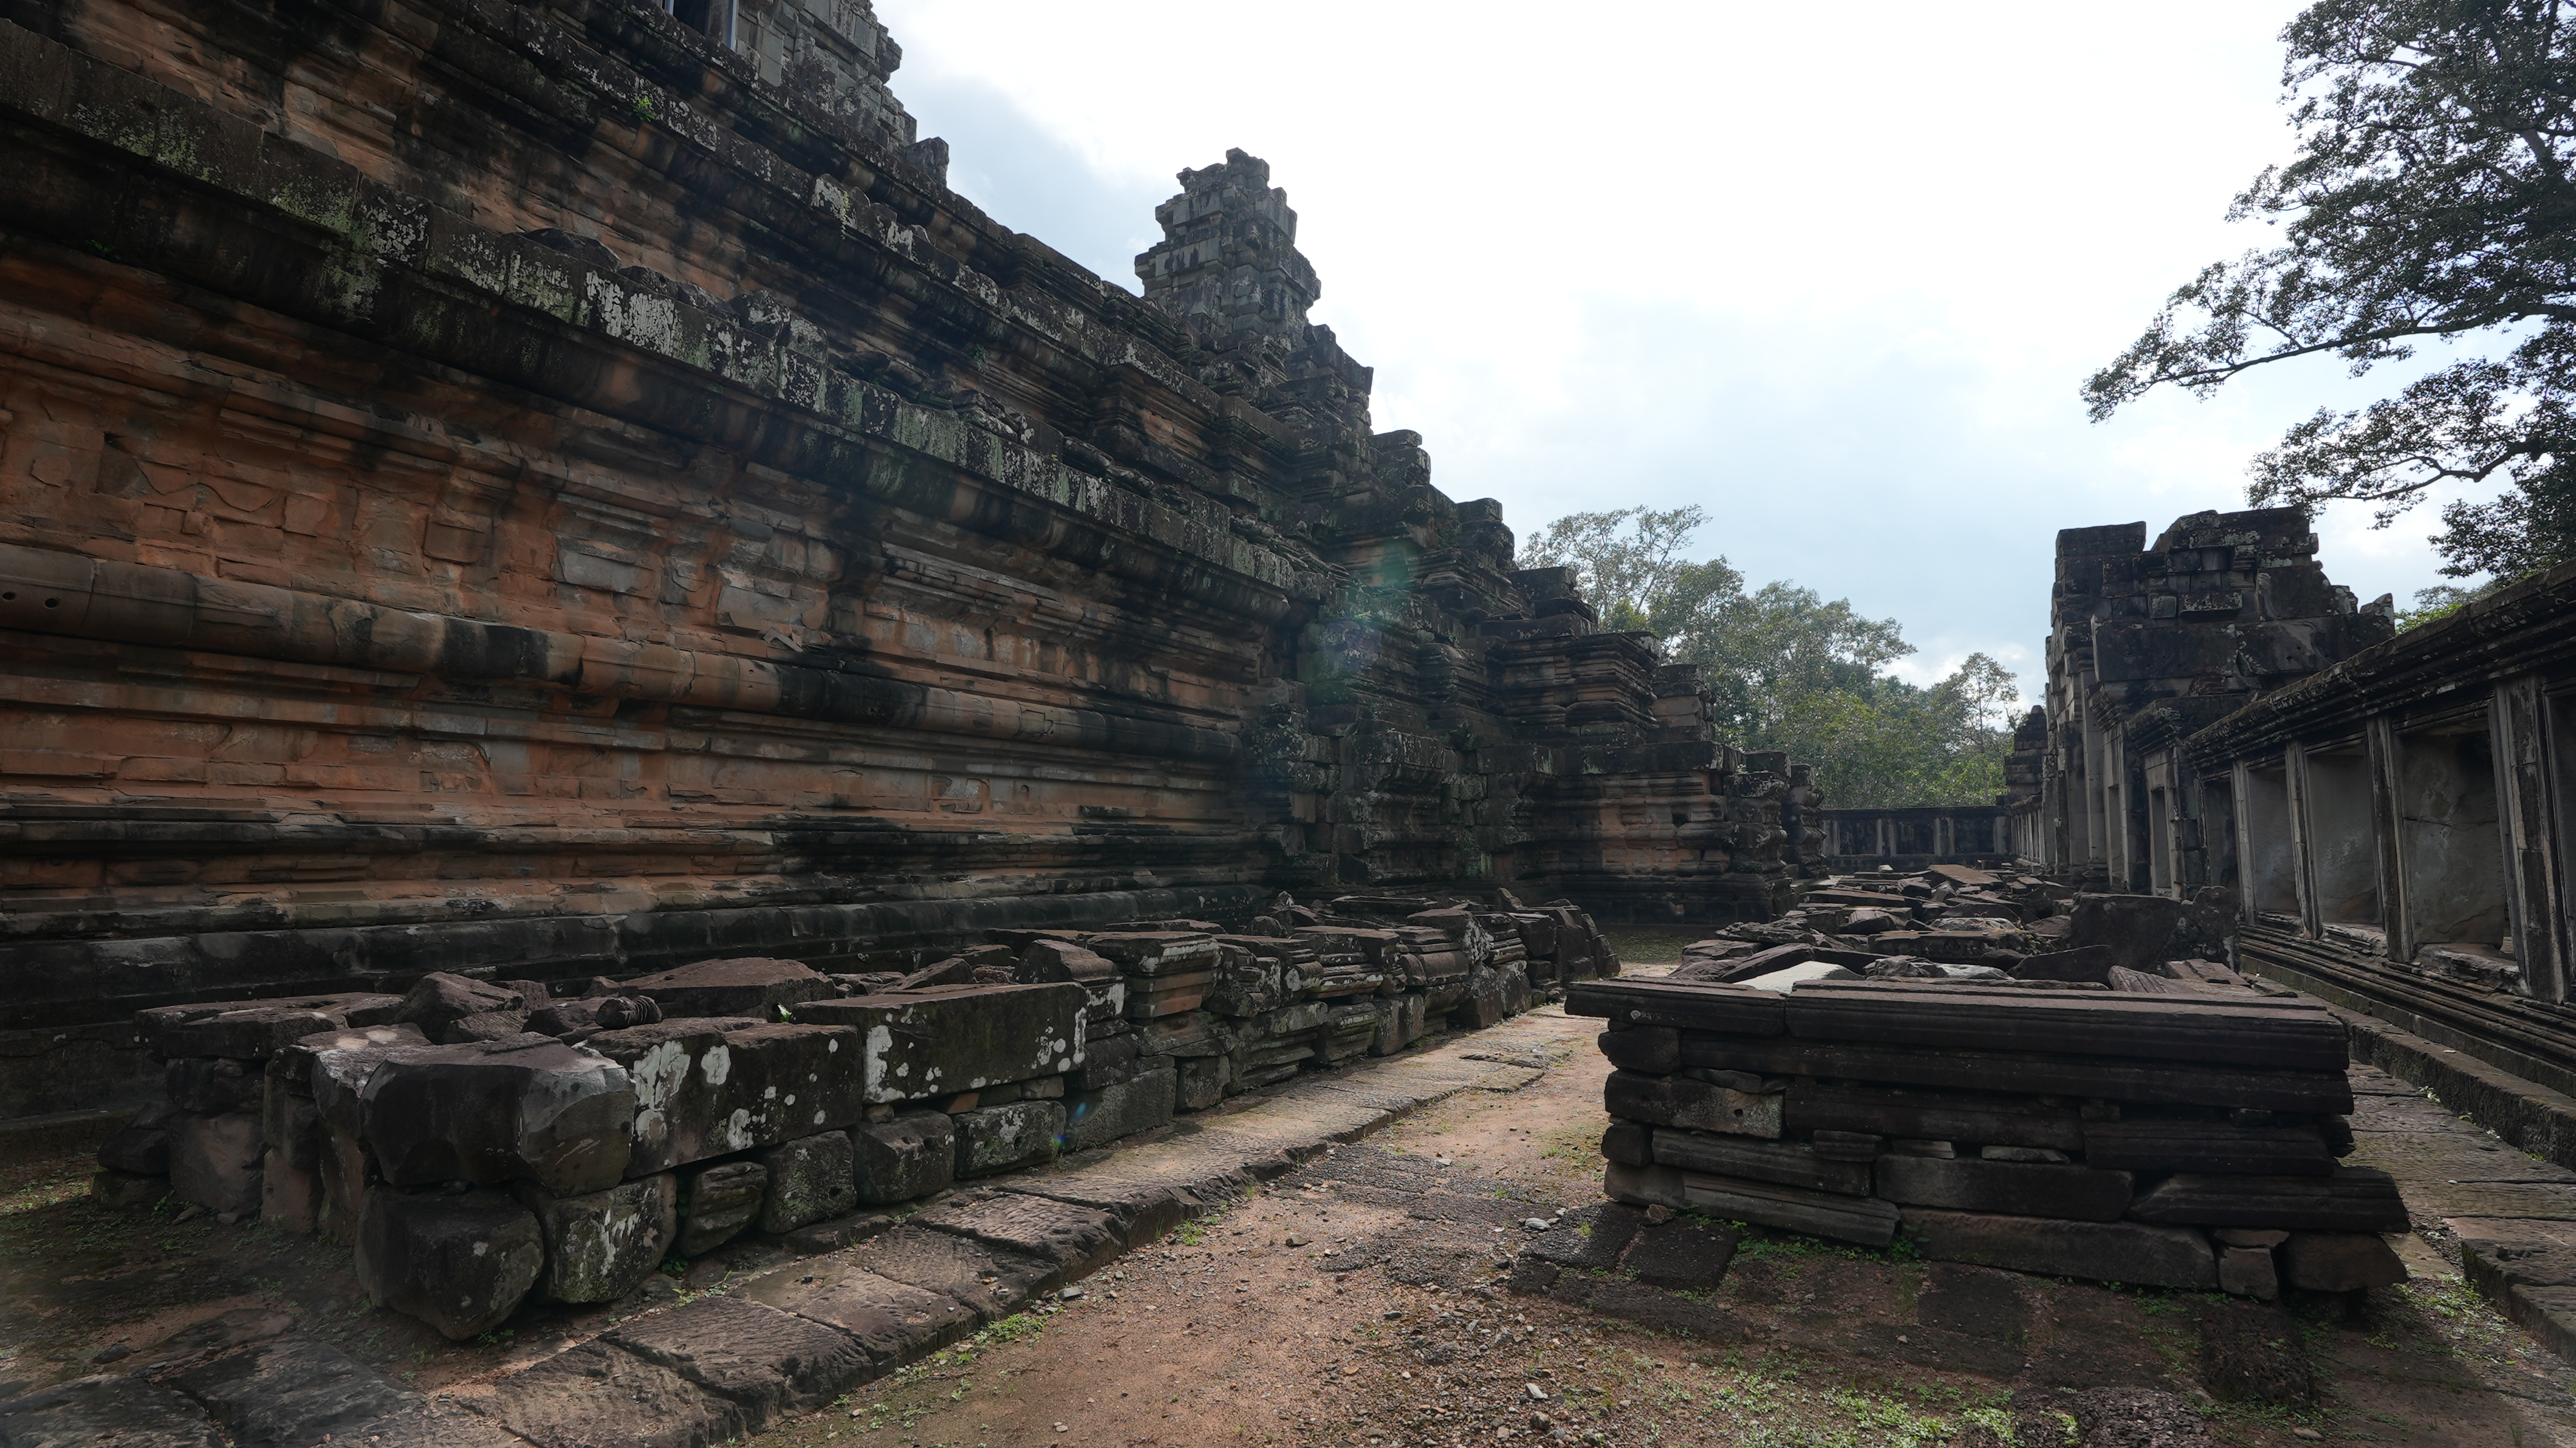 A view of the Ta Keo in the central zone of the Angkor Archaeological Park in Cambodia. /CGTN